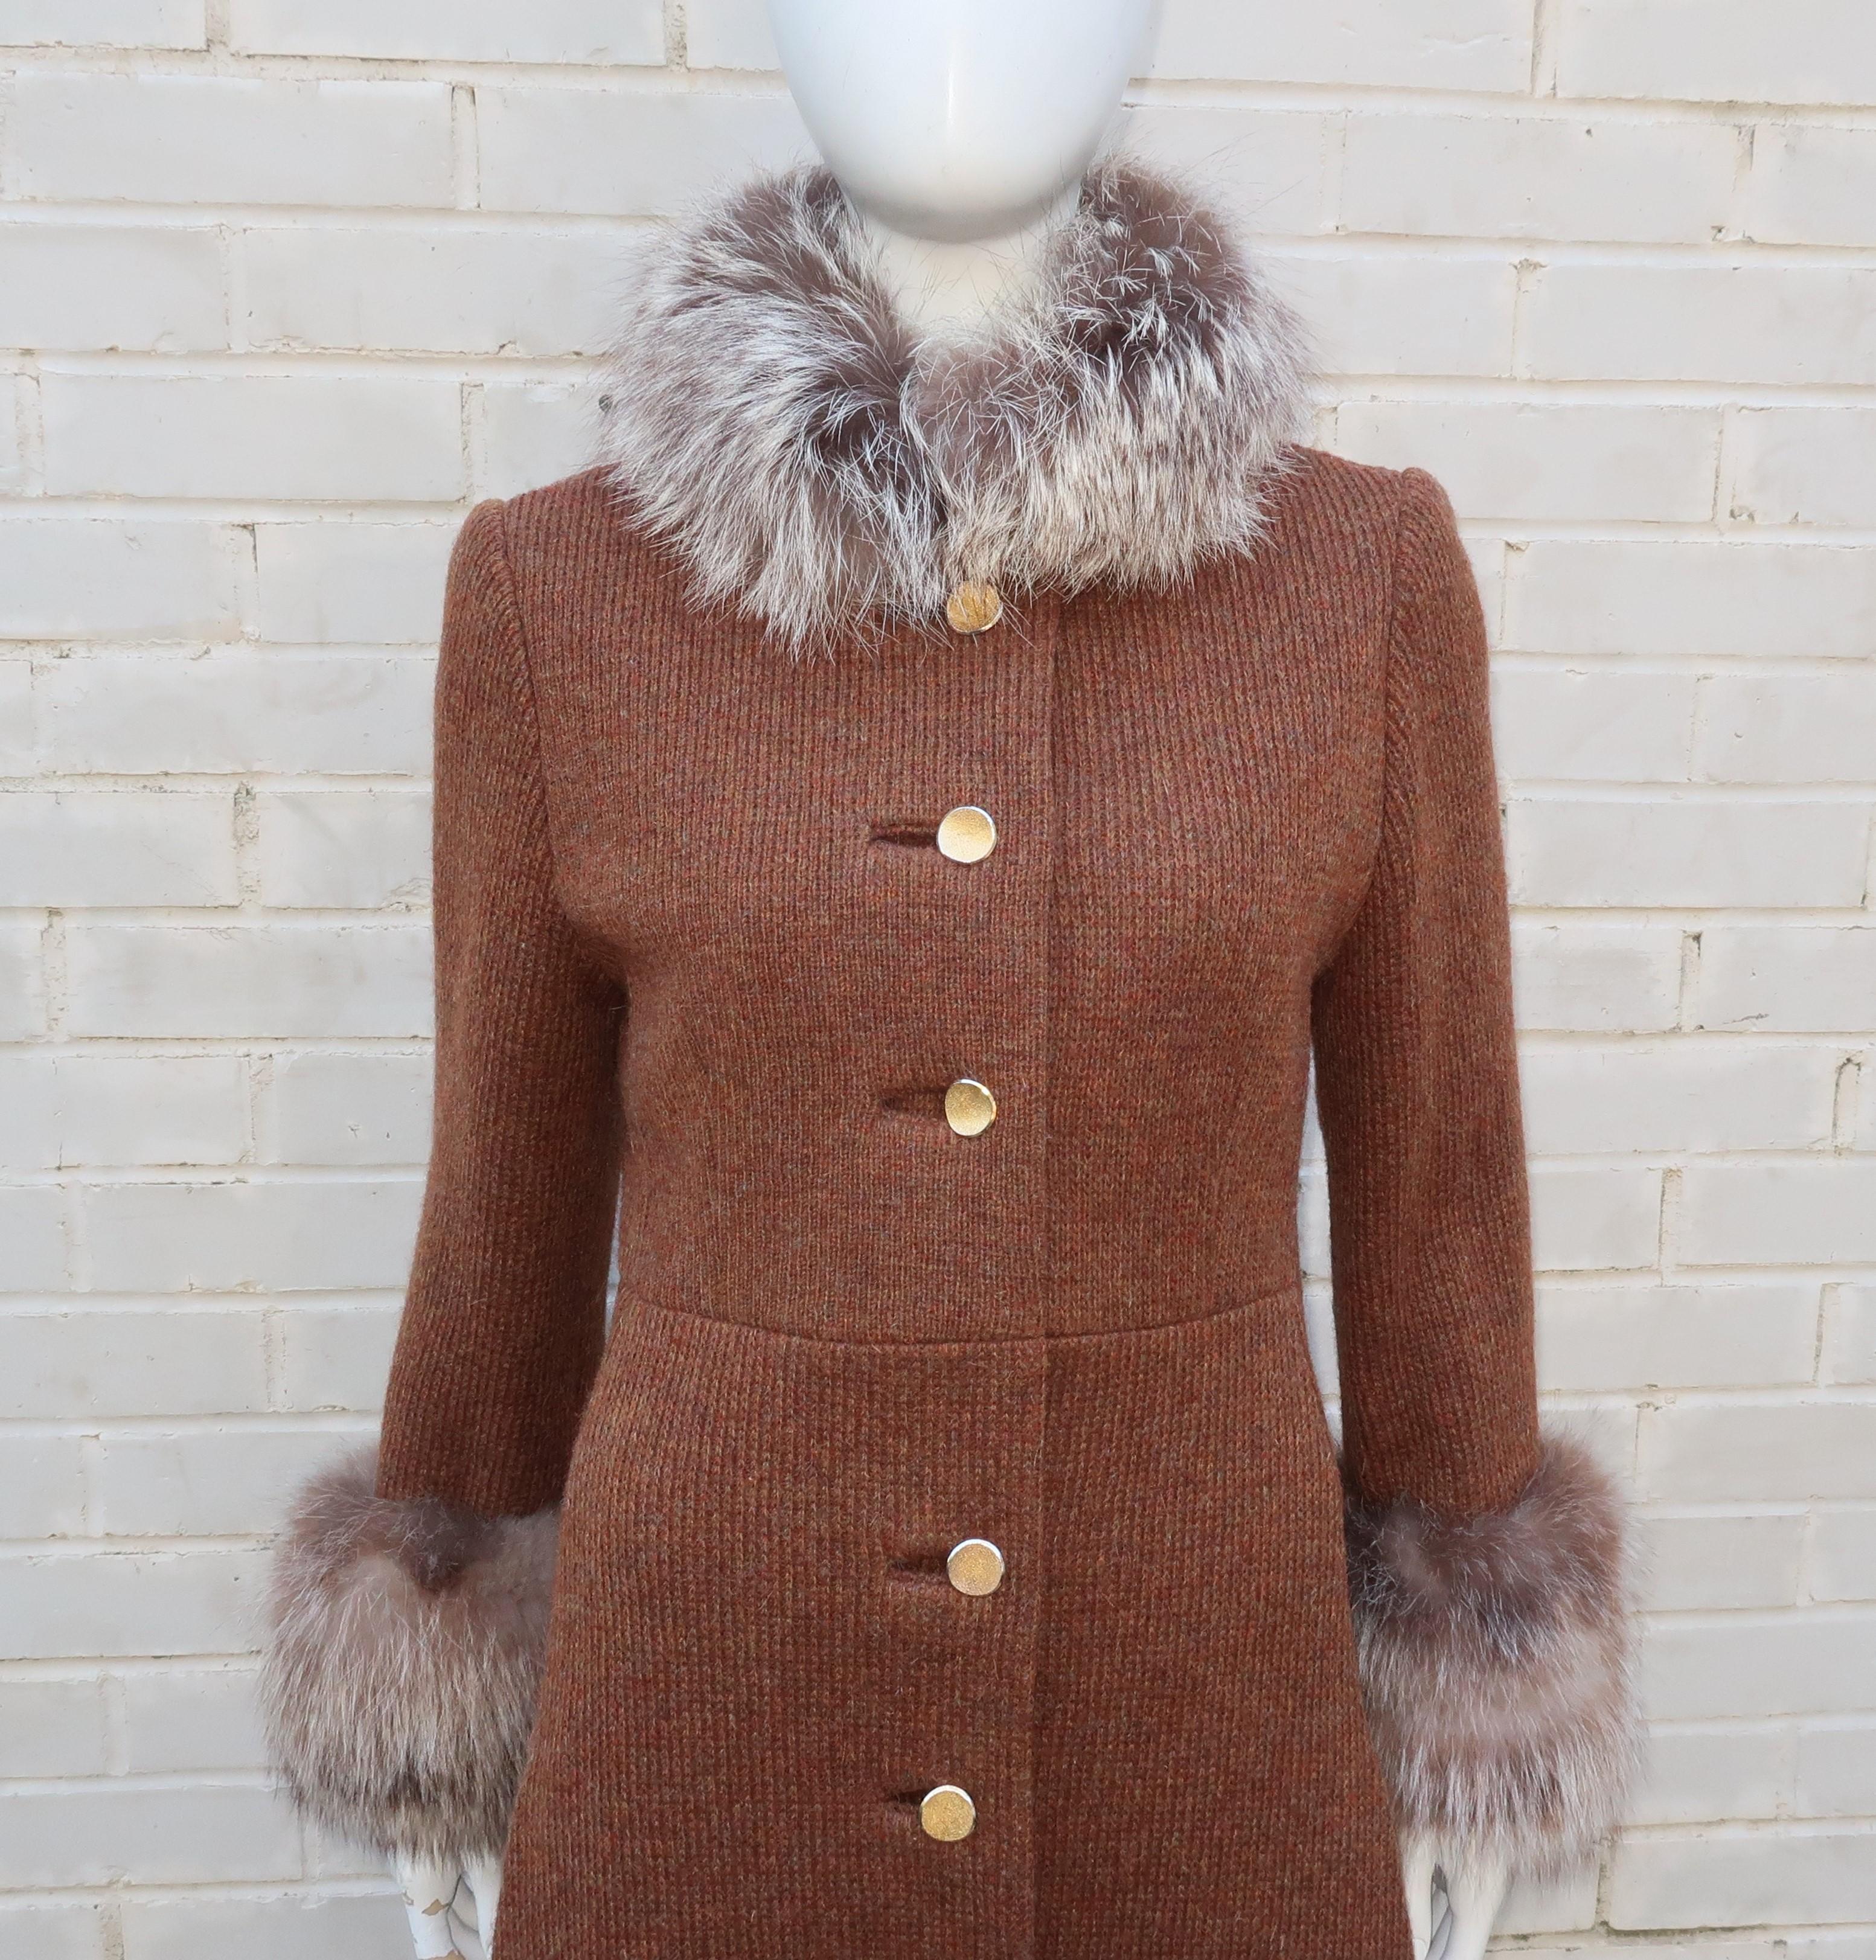 Lord & Taylor's 1960's mod version of a princess coat in a comfortable mohair blend wool knit with glamorous fox fur trim.  The body of the coat is an autumnal rust colored brown wool knit in an elongated princess cut which buttons and snaps up the